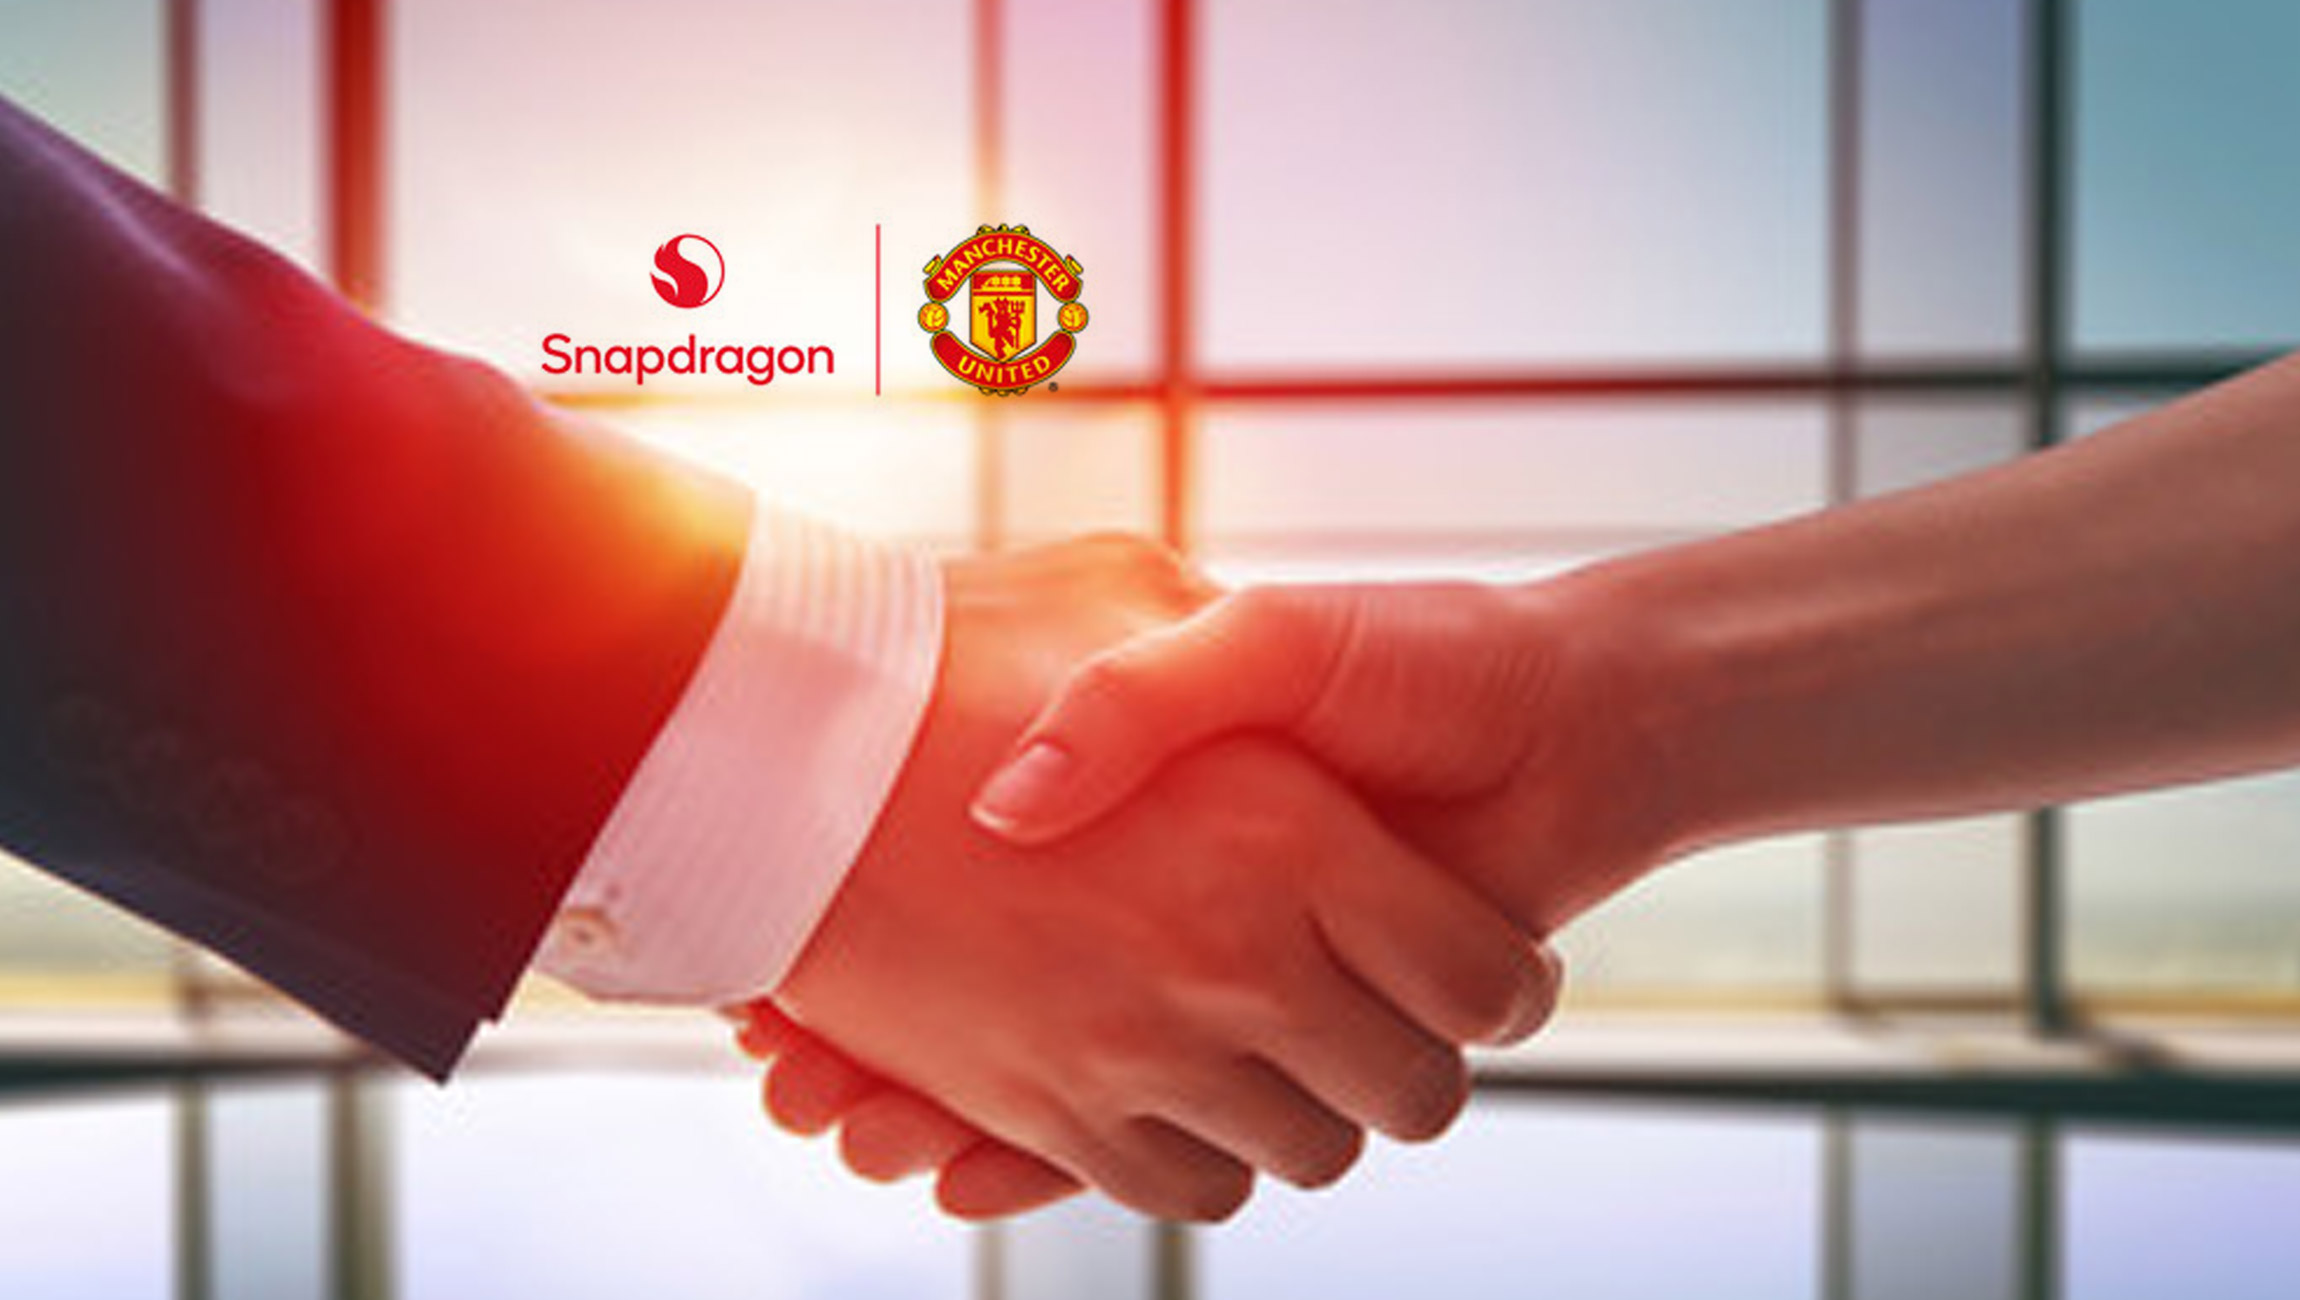 Qualcomm Becomes Official Global Partner of Manchester United